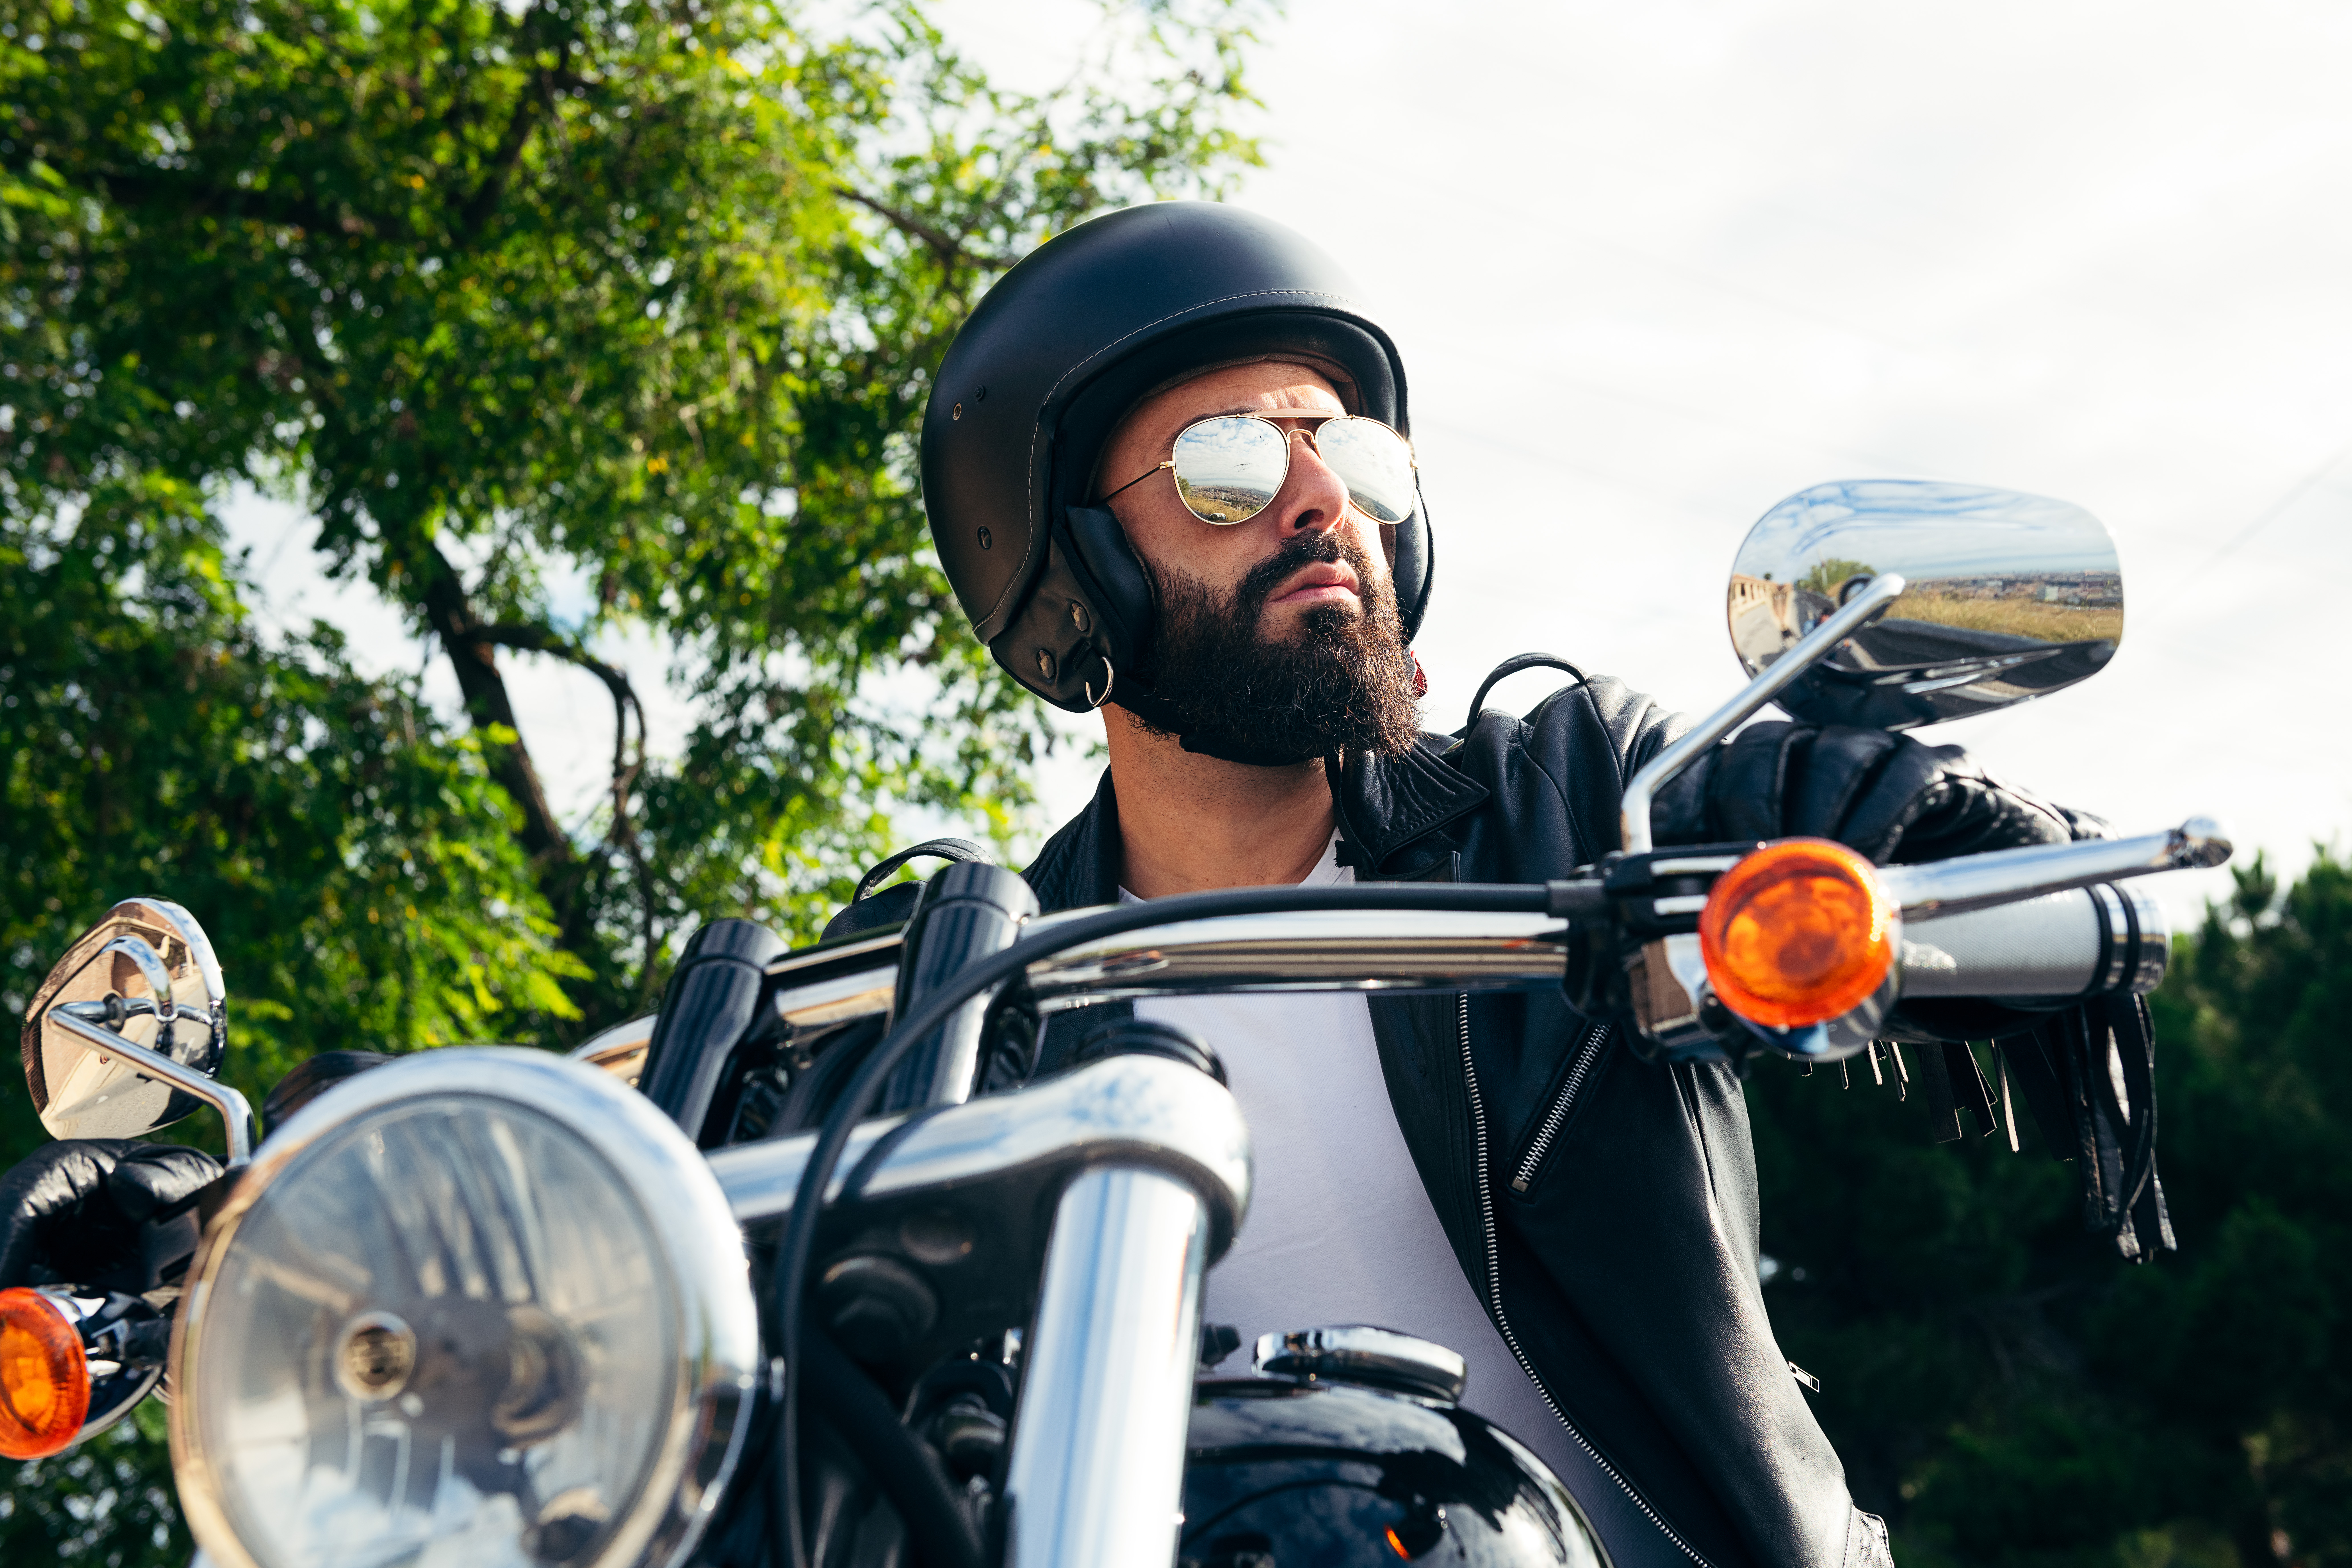 man with helmet and sunglasses riding a motorcycle